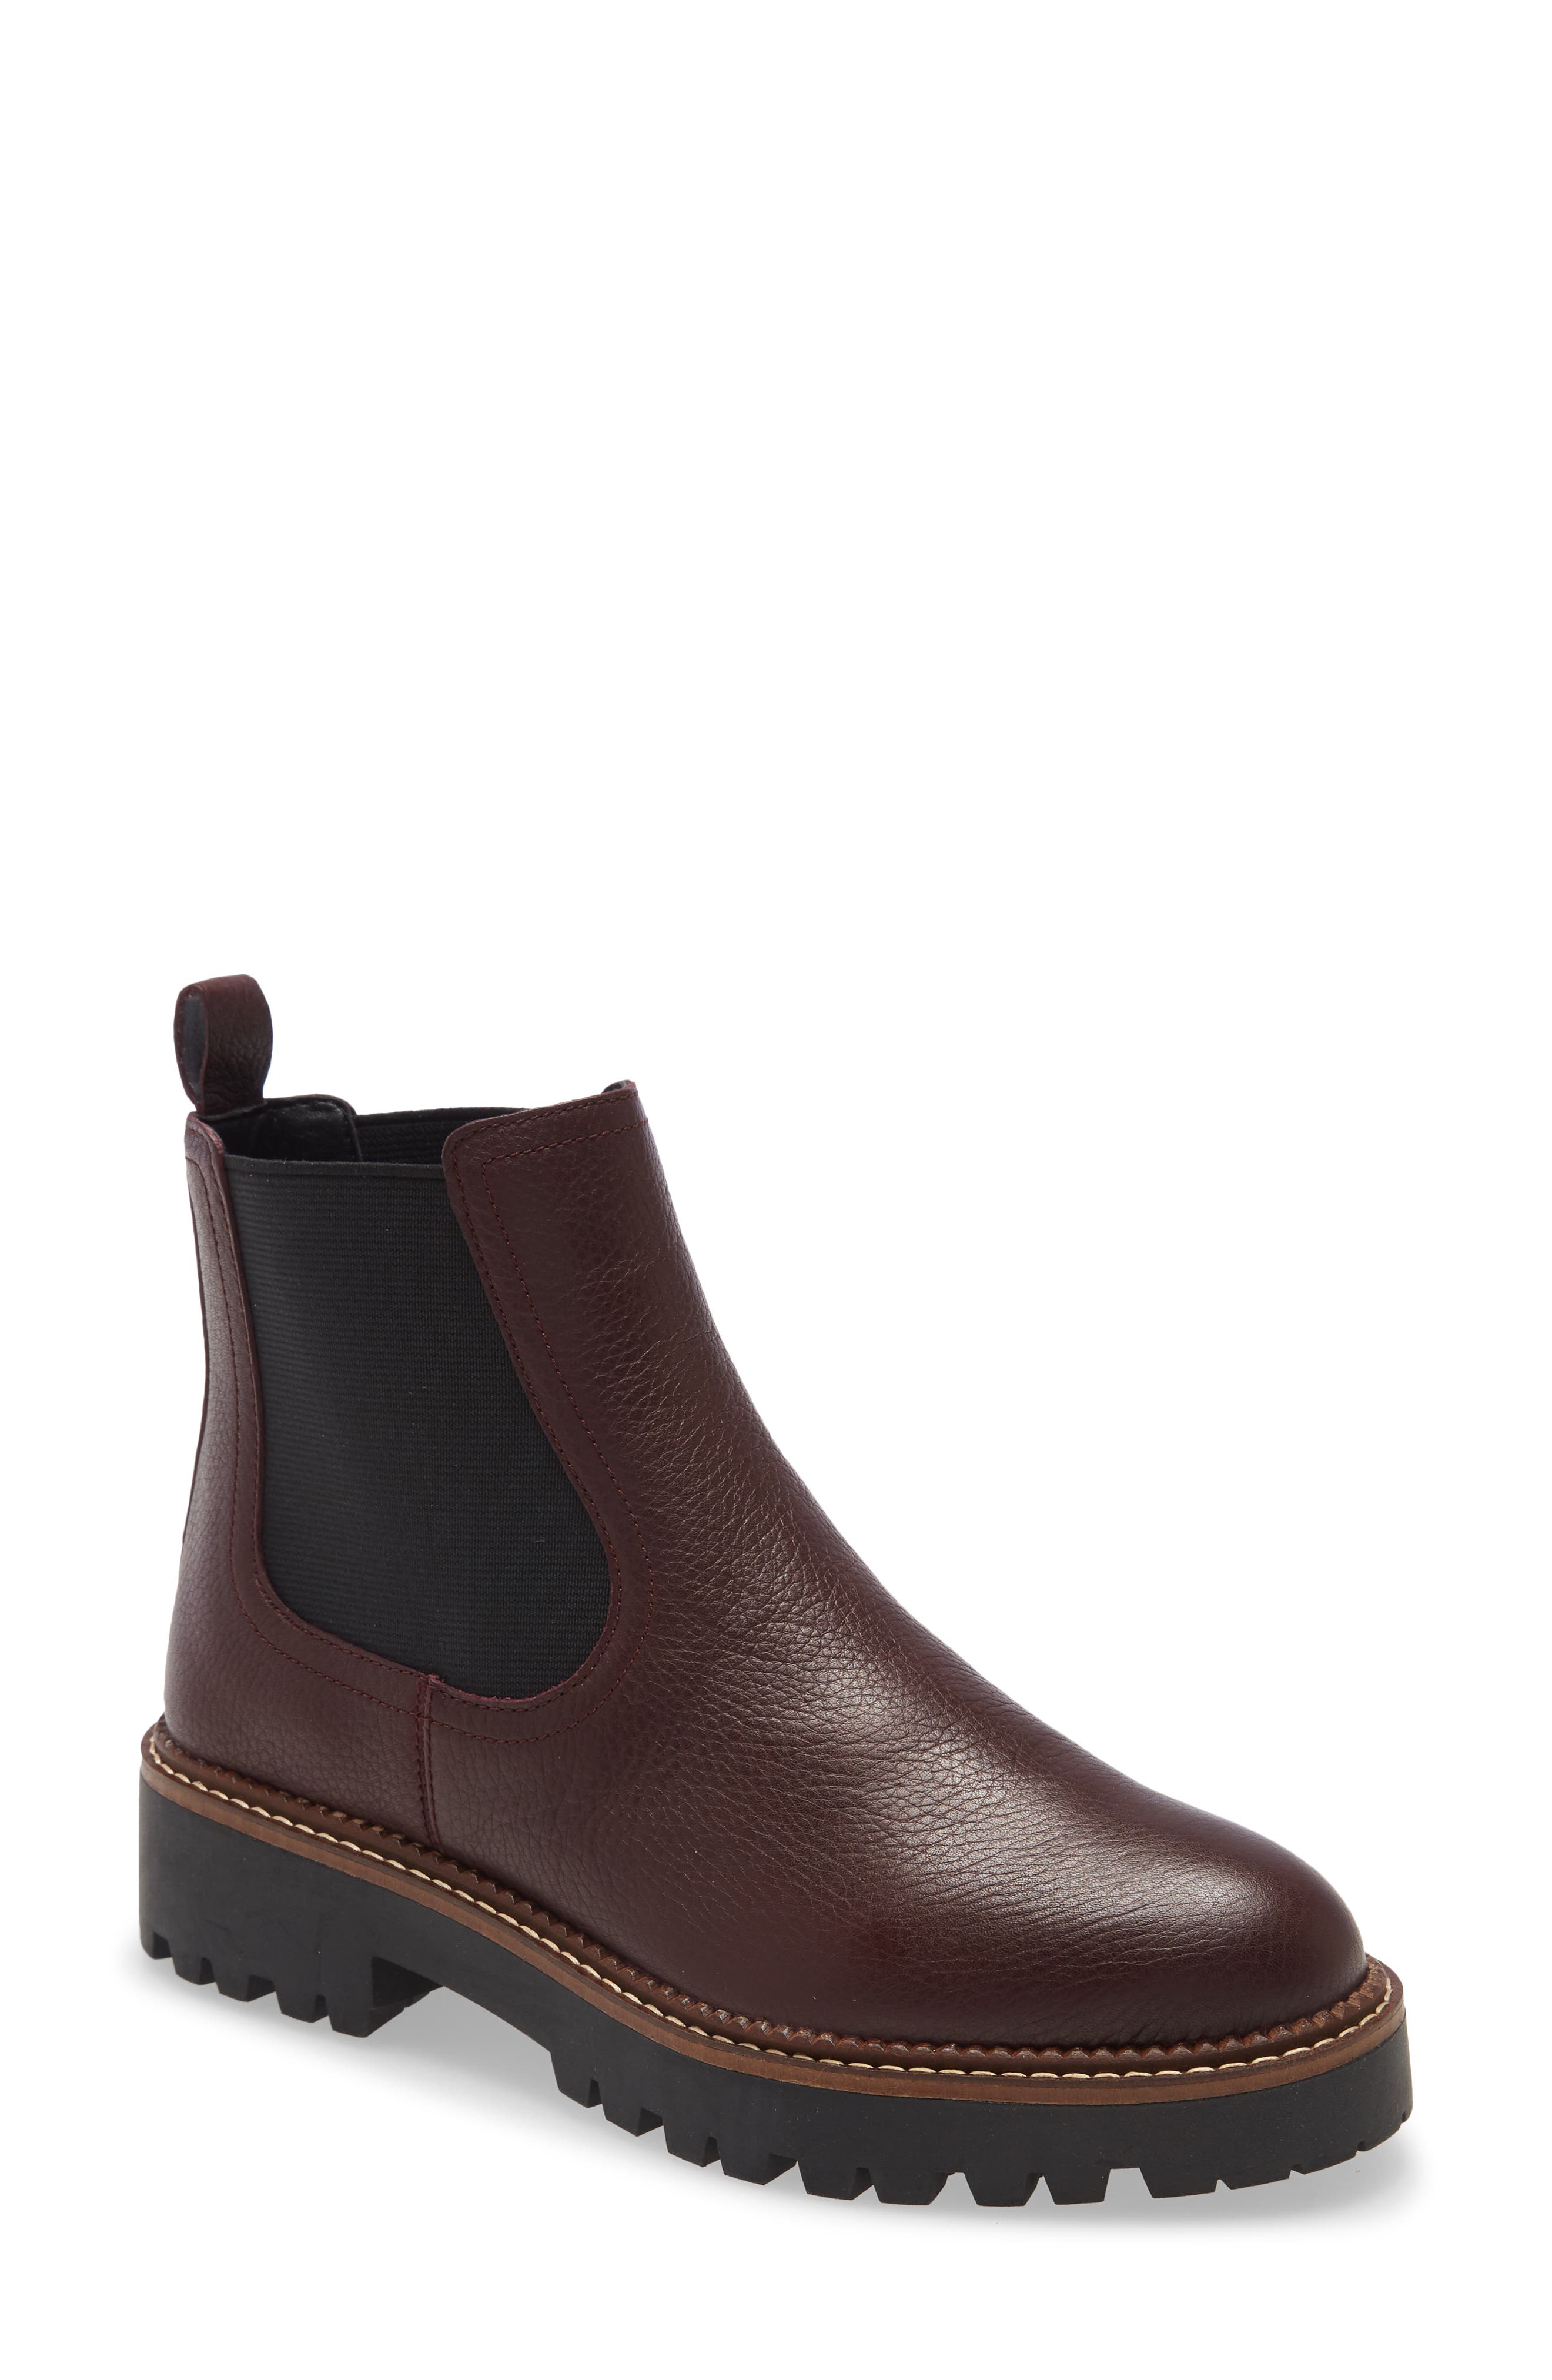 R15B Spot On F5R949 Ladies Burgundy or Brown Ankle Boots 